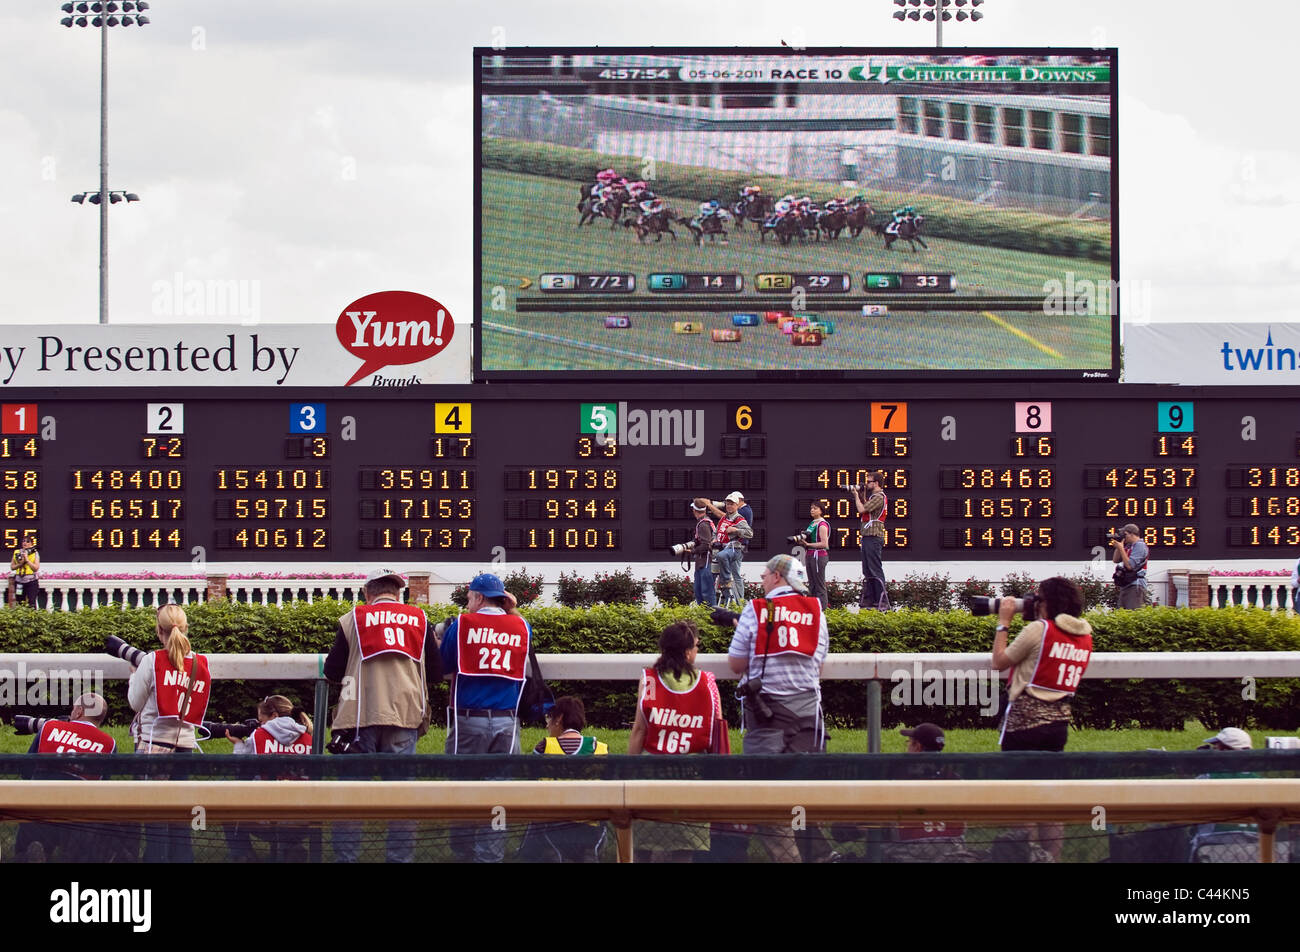 Photographers Preparing to Photograph Horse Race as it Unfolds on a Giant Screen Above Them at Churchill Downs on Oaks Day Stock Photo